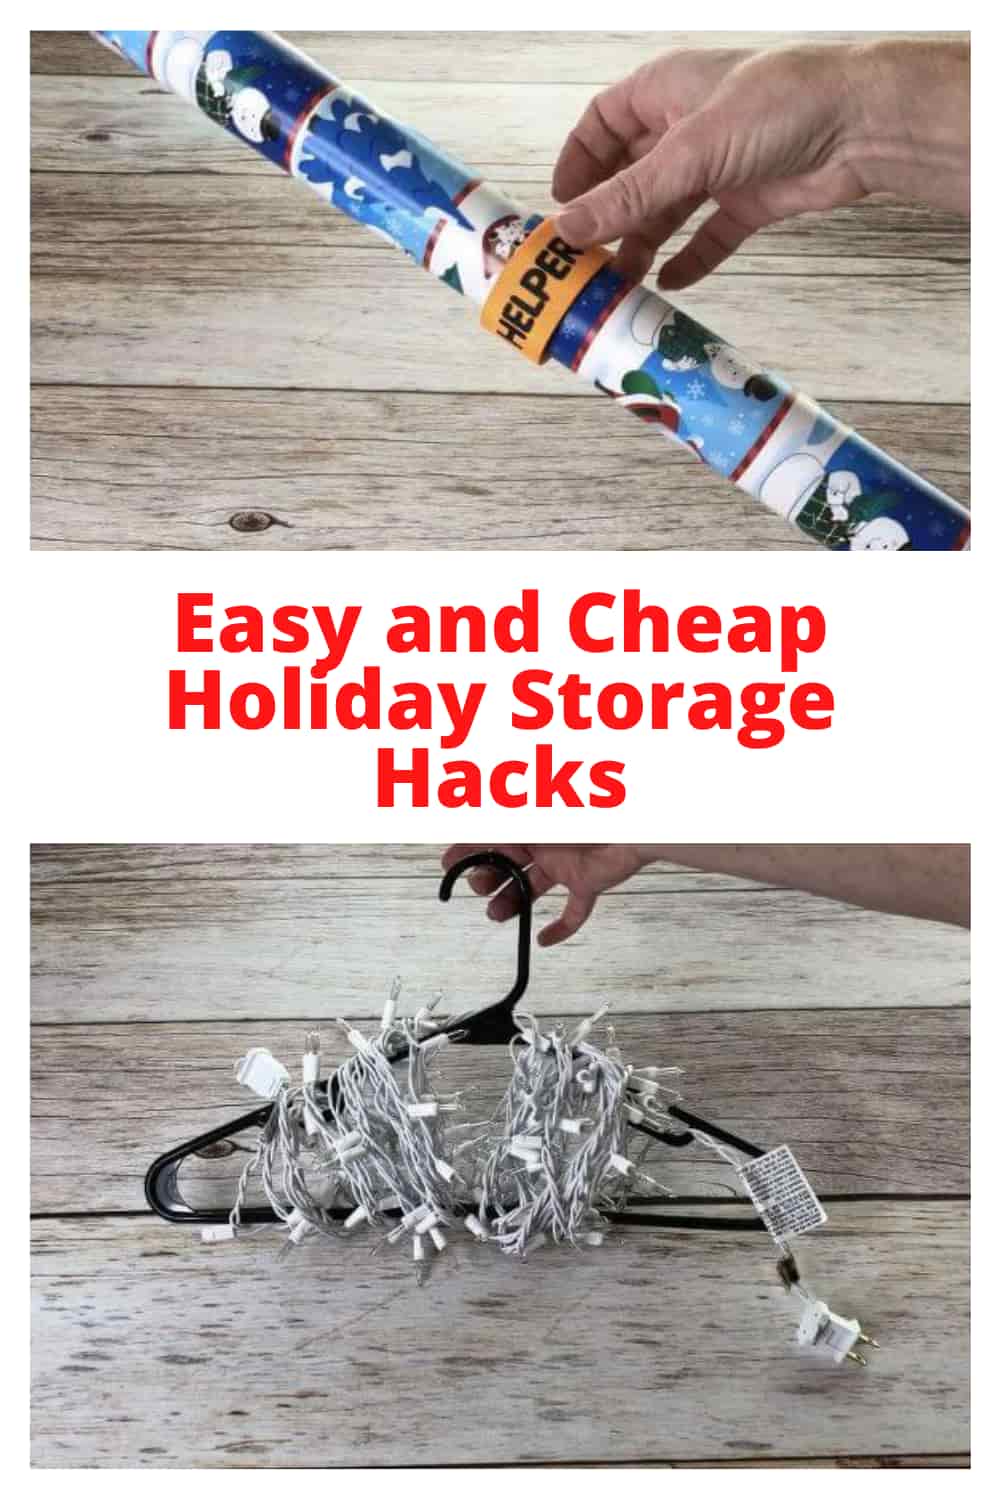 Easy and Cheap Holiday Storage Ideas and Hacks with Video